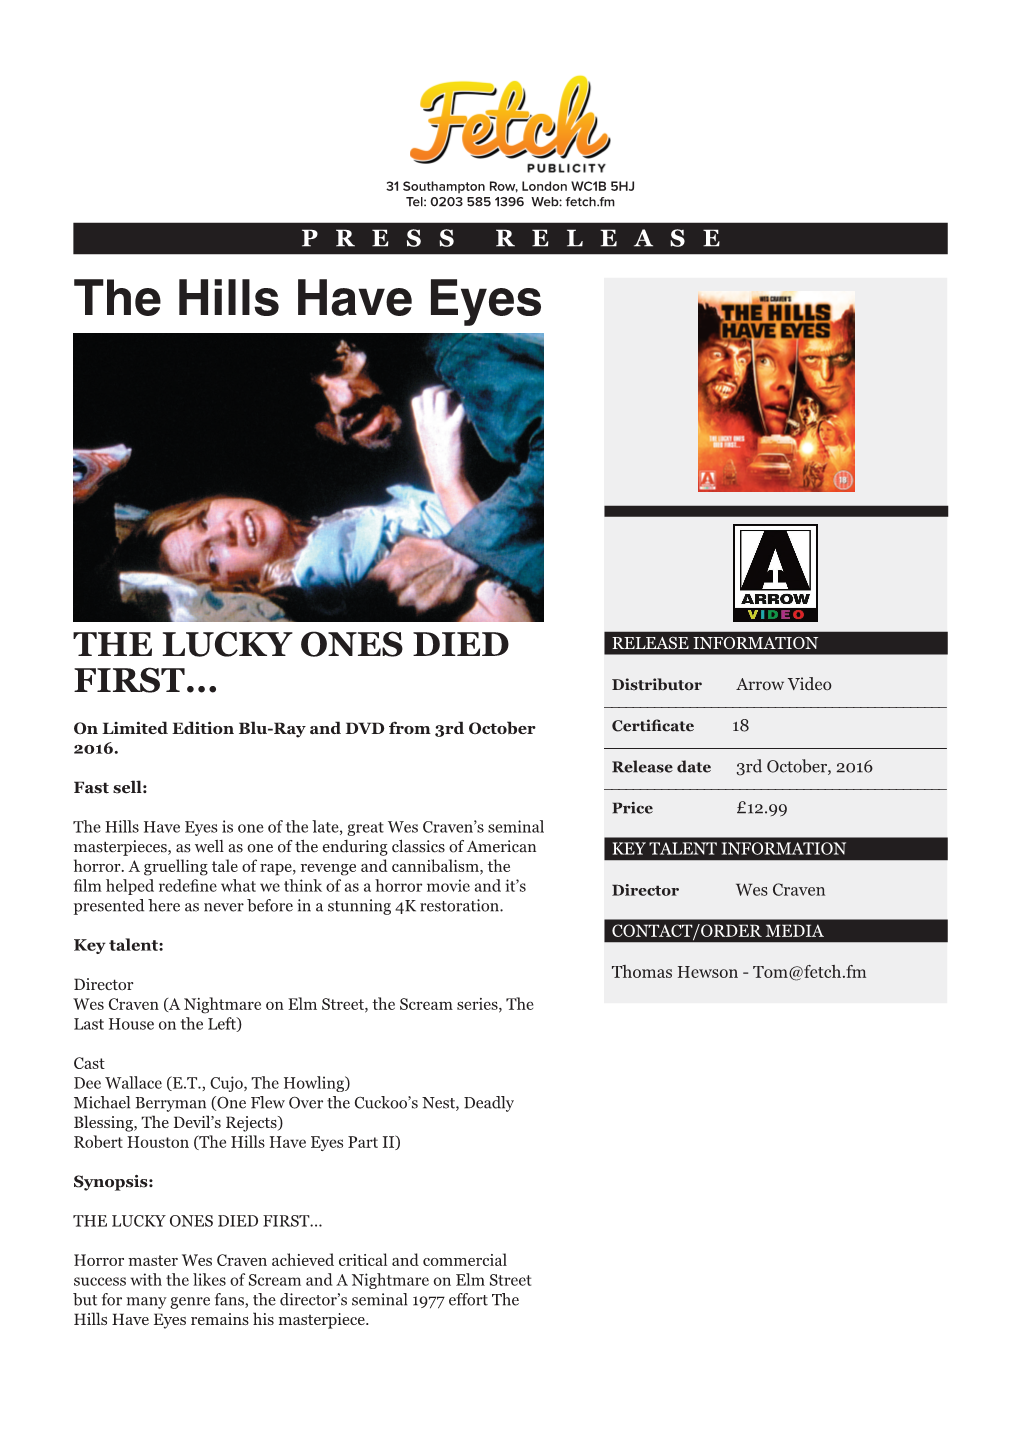 The Hills Have Eyes Press Release.Indd